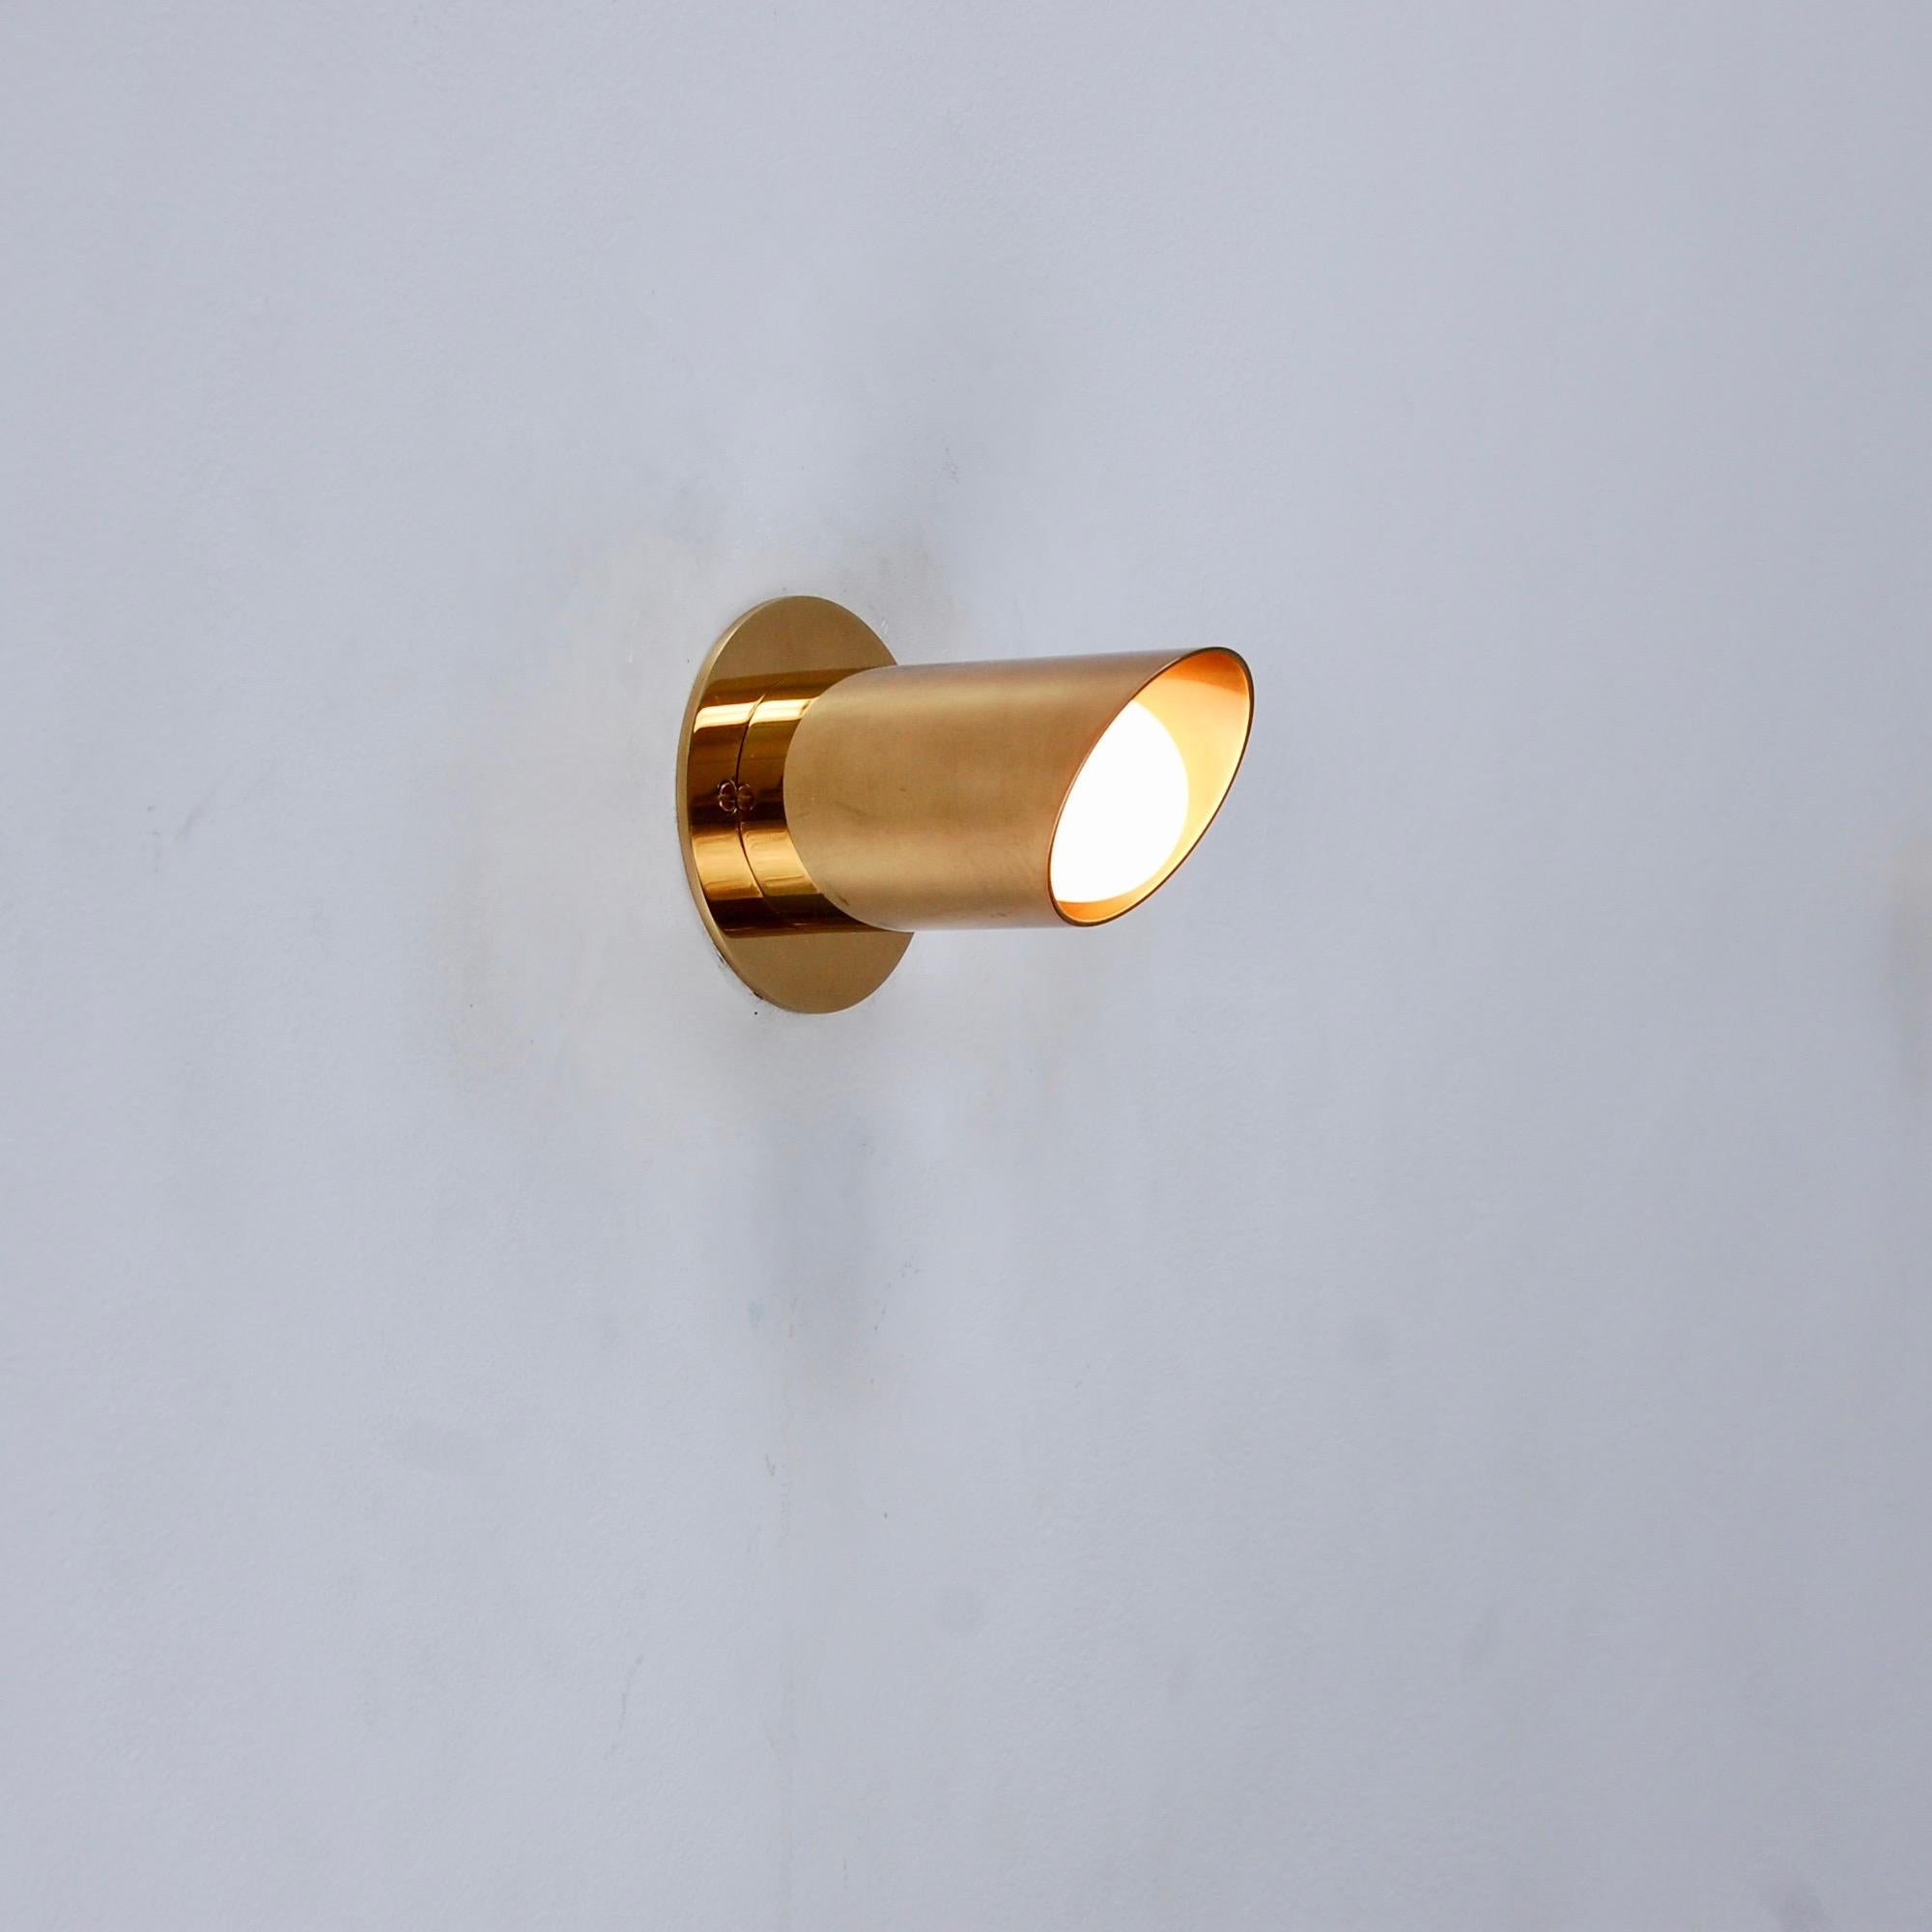 LUpipe classic all brass tailpipe sconce in aged patina brass by Lumfardo Luminiares. Inspired by 1950s Italian midcentury design, this sconce is ideal for vanity mirrors or to illuminate an artwork wall. Can also be used as ceiling mount. Single